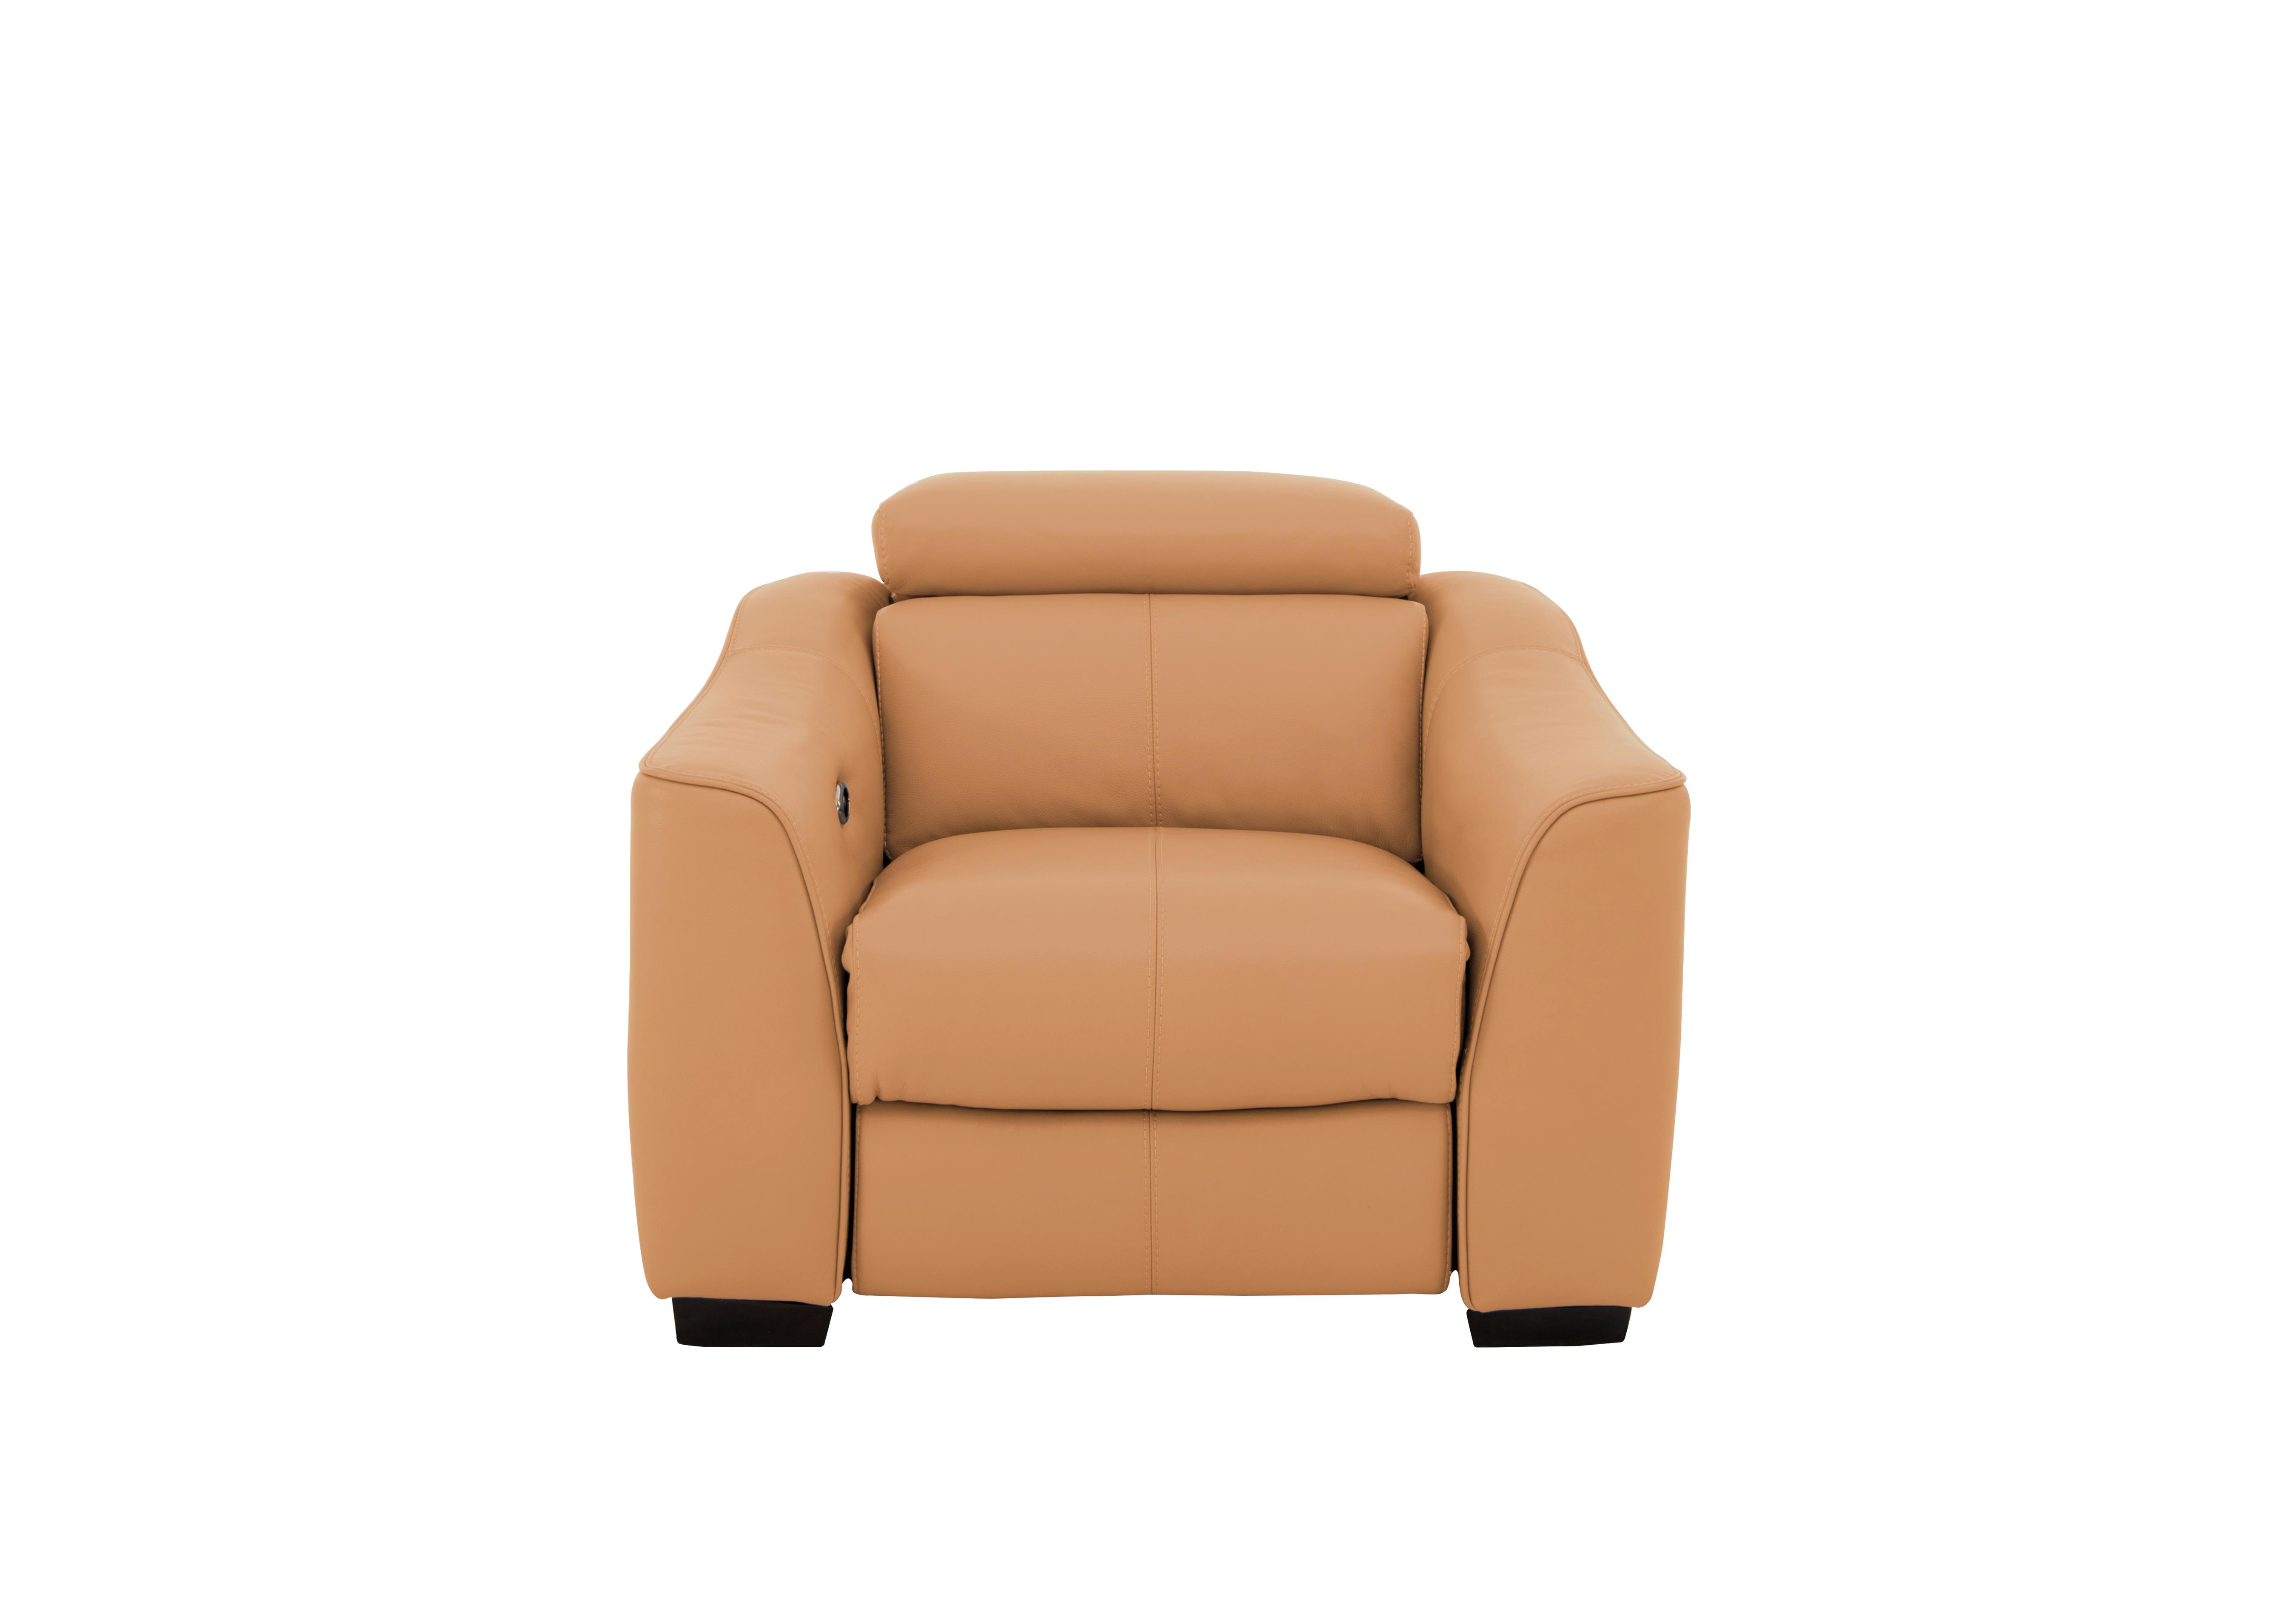 Elixir Leather Armchair in Bv-335e Honey Yellow on Furniture Village